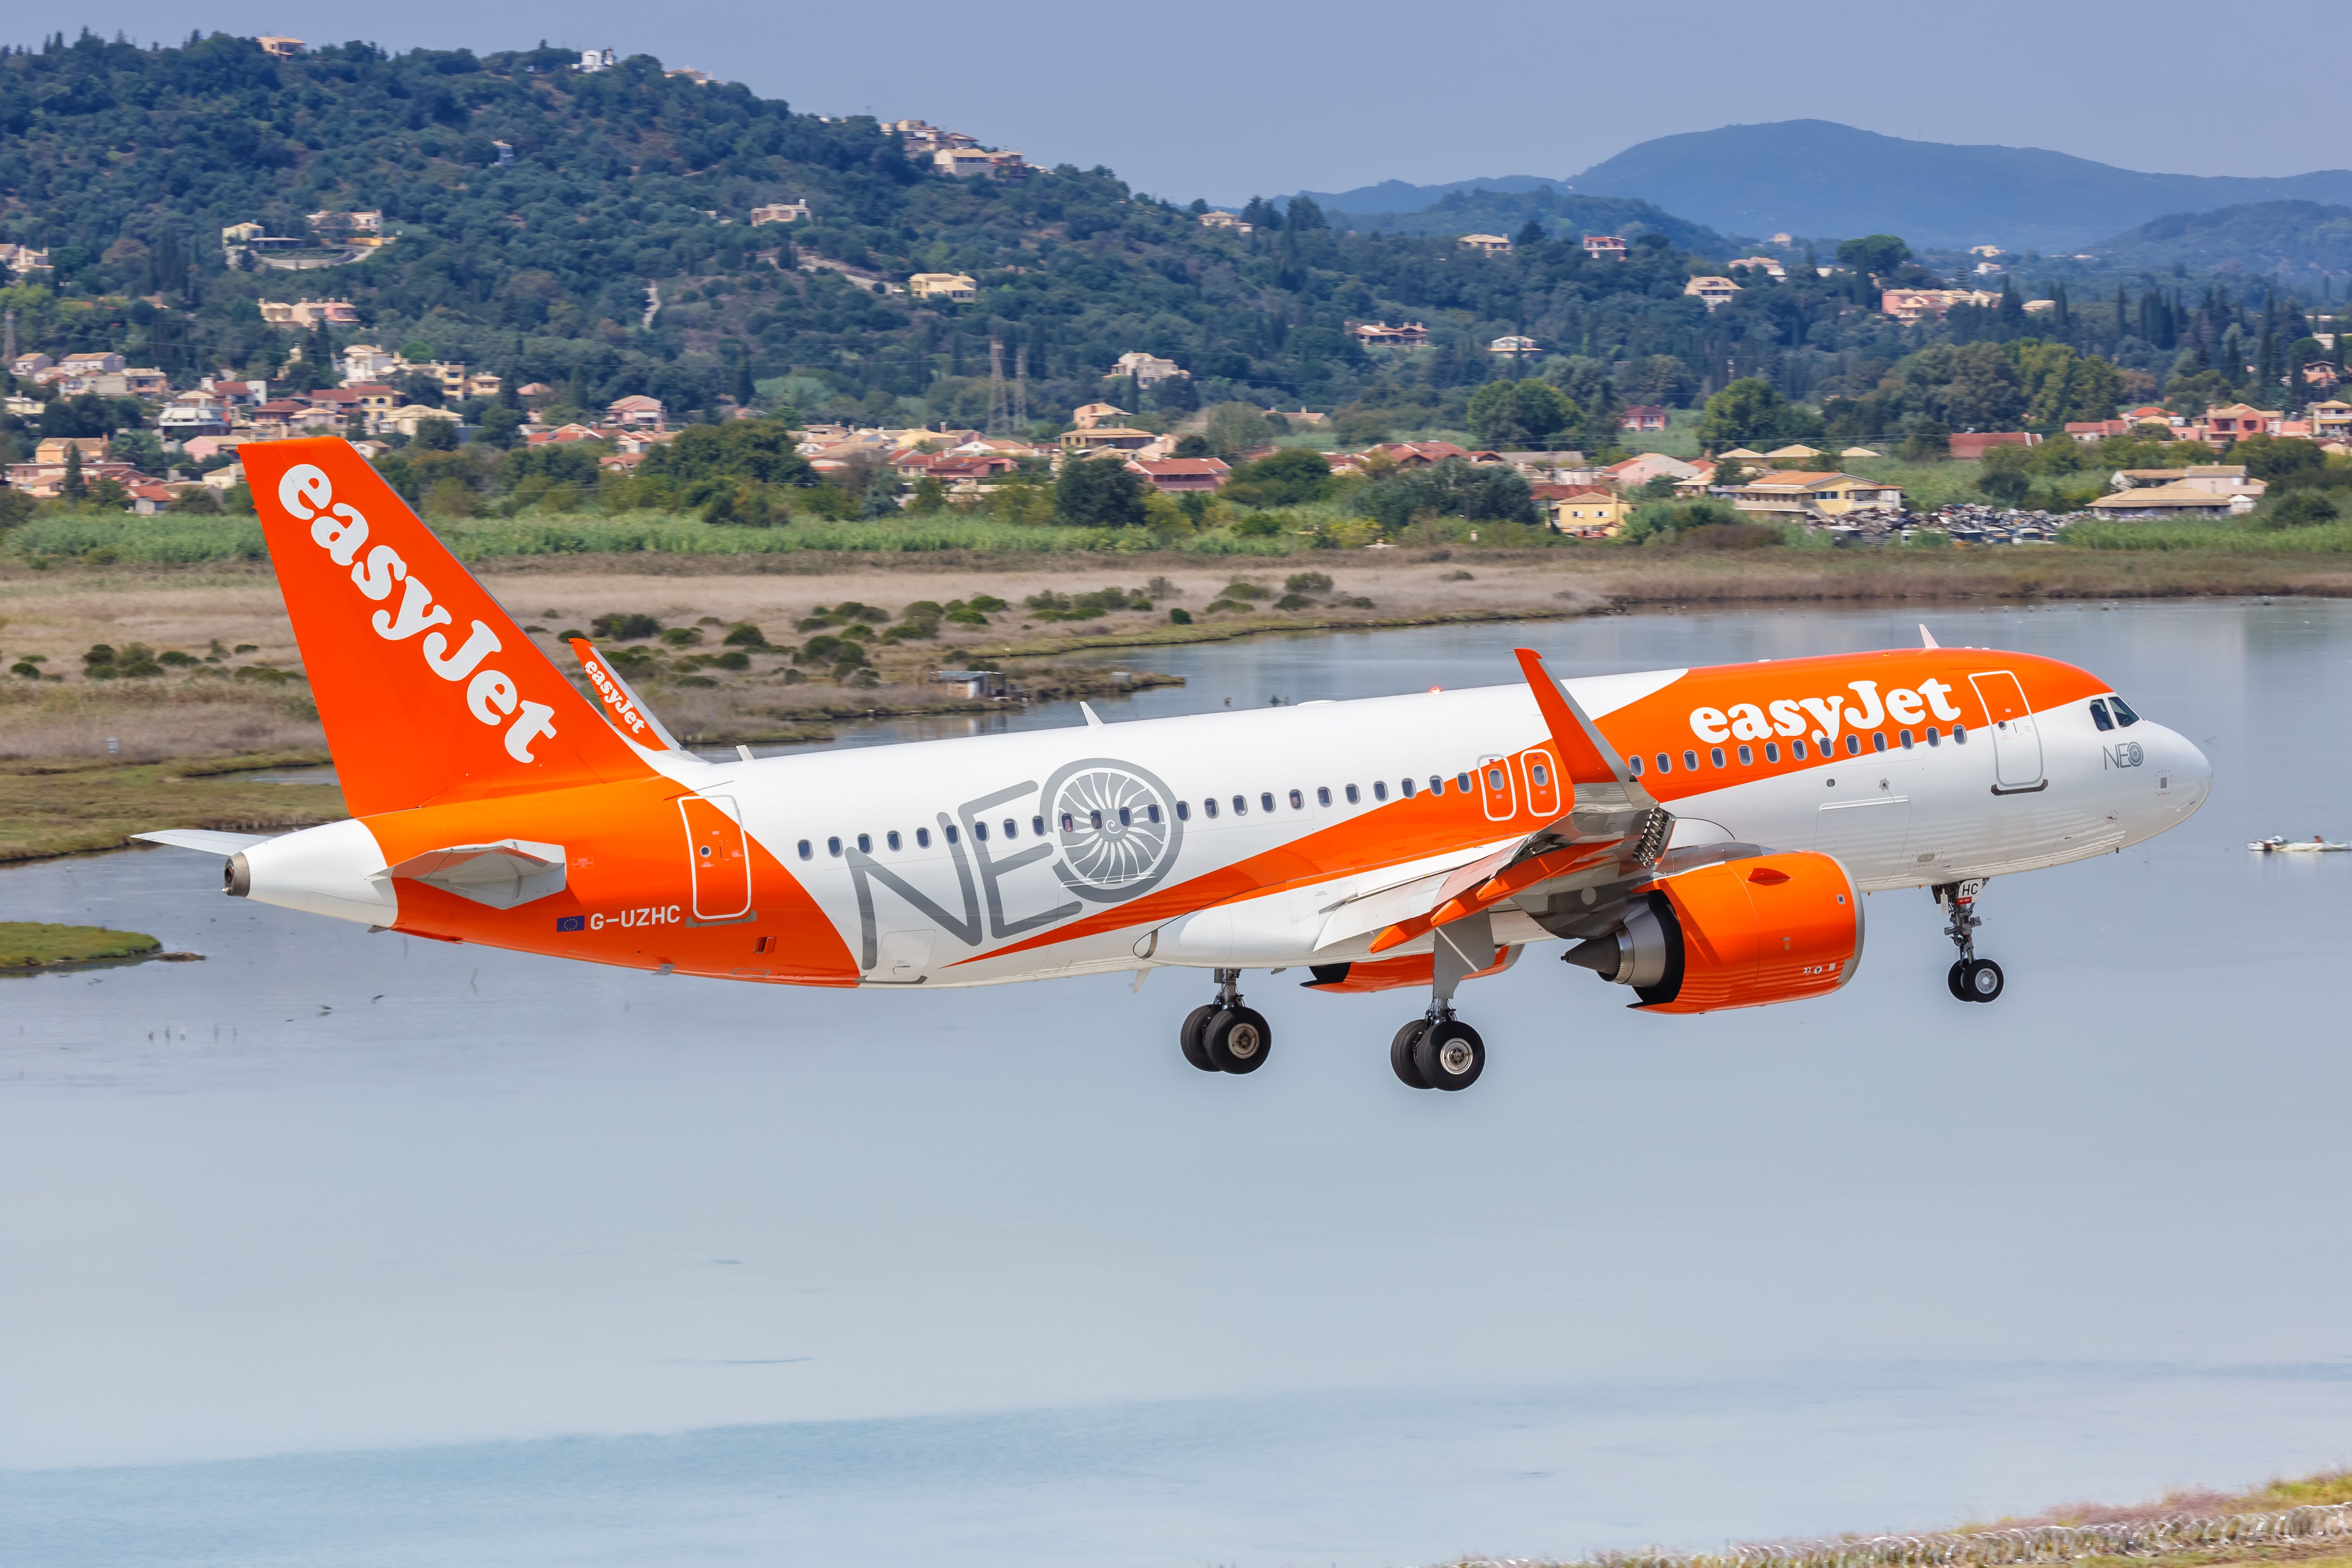 An easyJet Airbus A320neo about to land at Corfu, Greece.